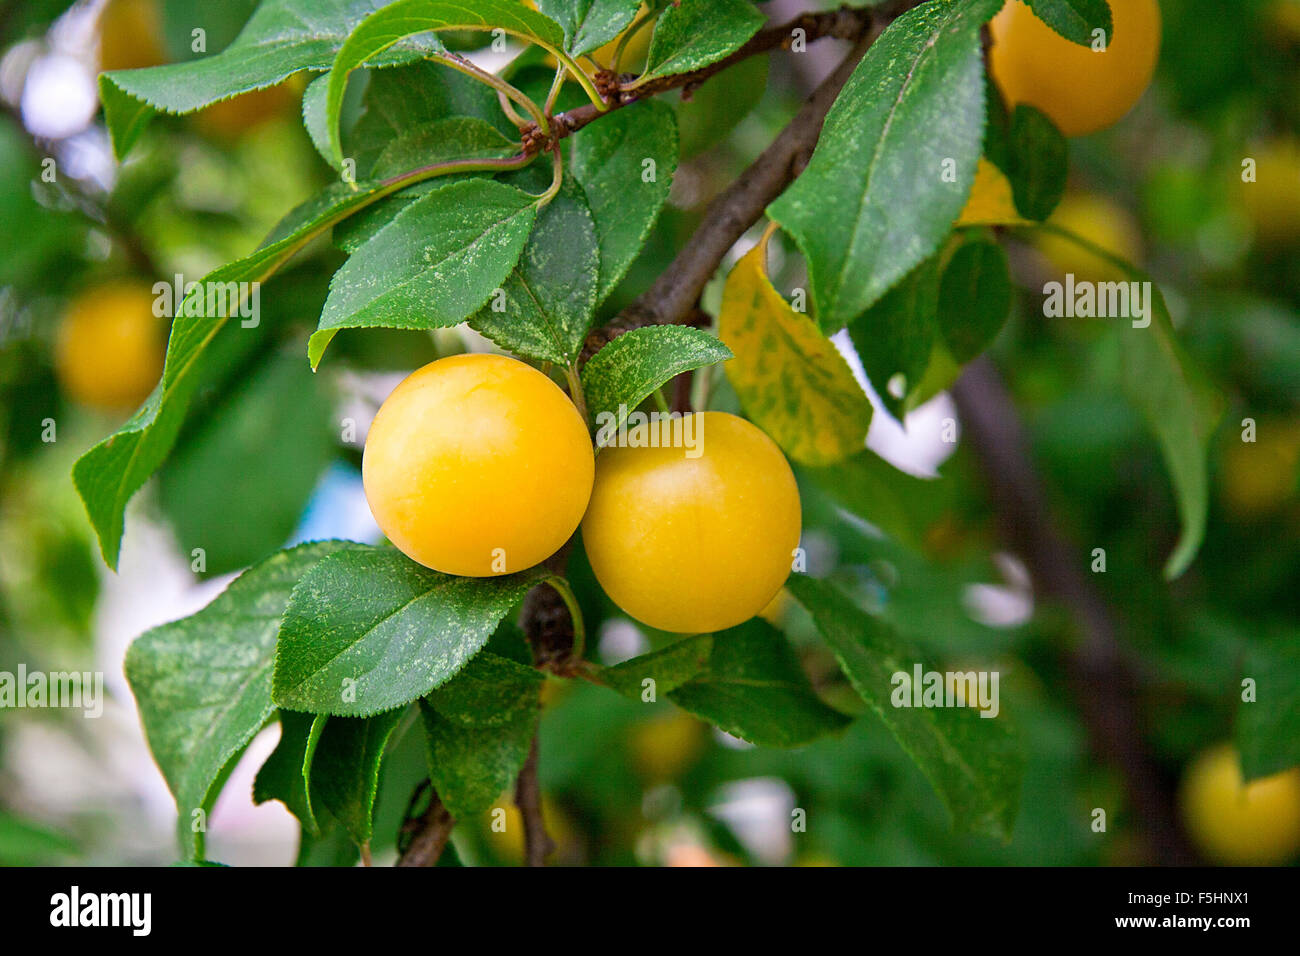 Mature Yellow Cherry Plums on the branch. Stock Photo